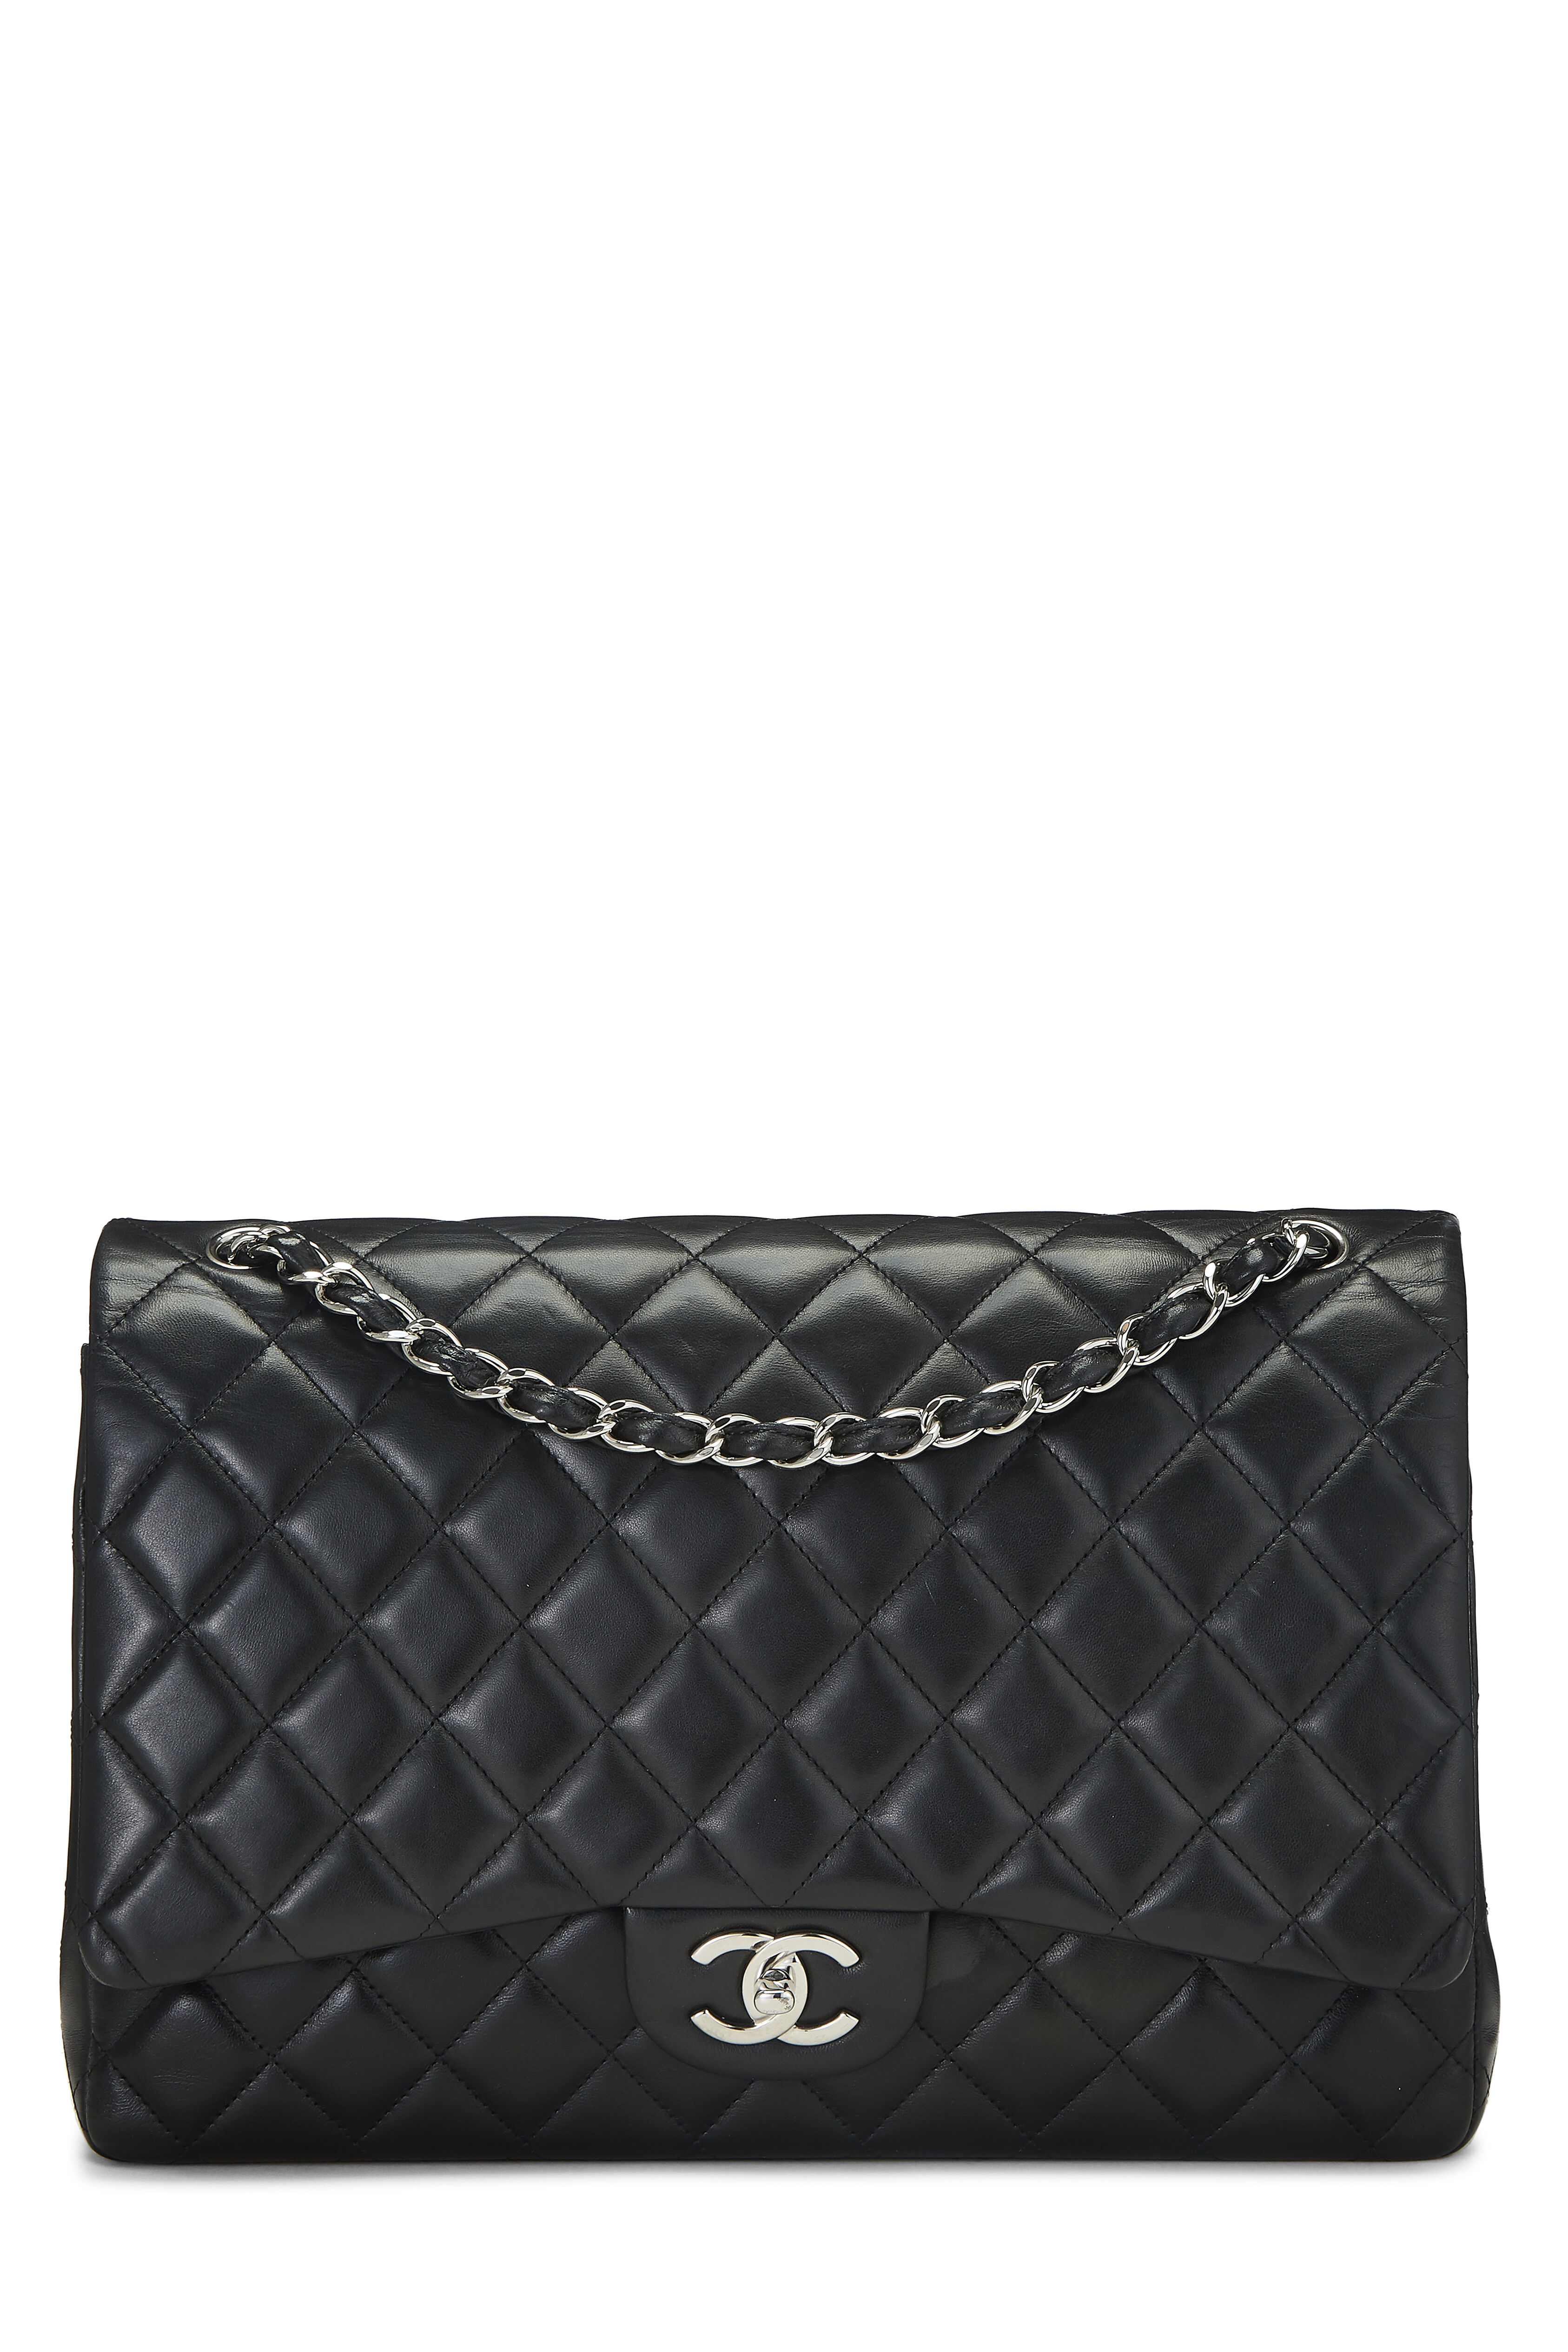 Chanel - Black Quilted Lambskin New Classic Double Flap Maxi